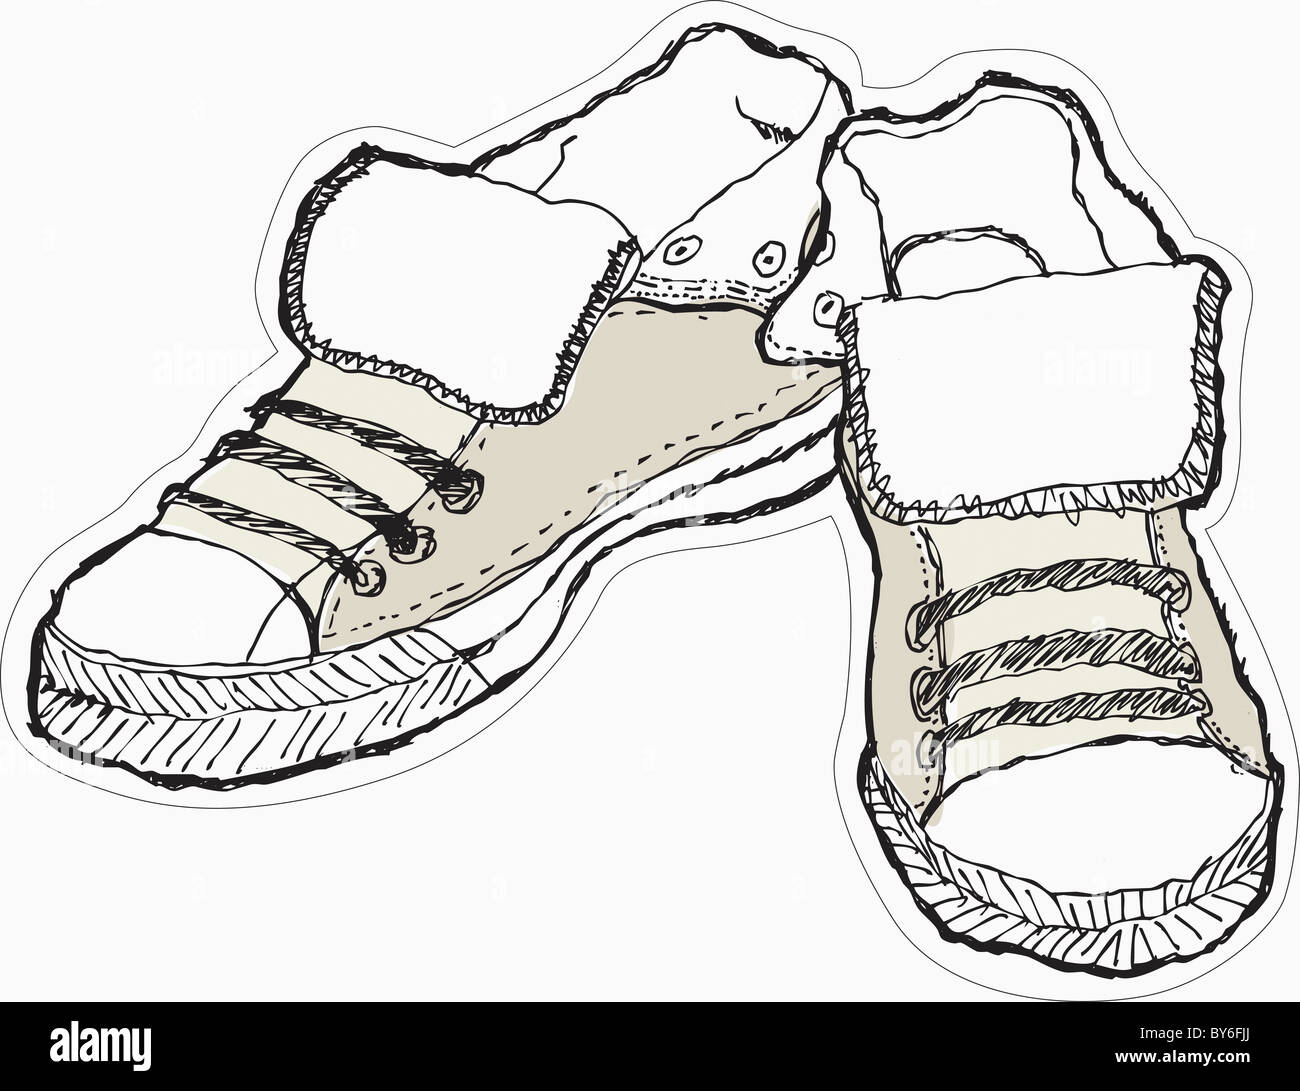 sneakers in illustration Stock Photo